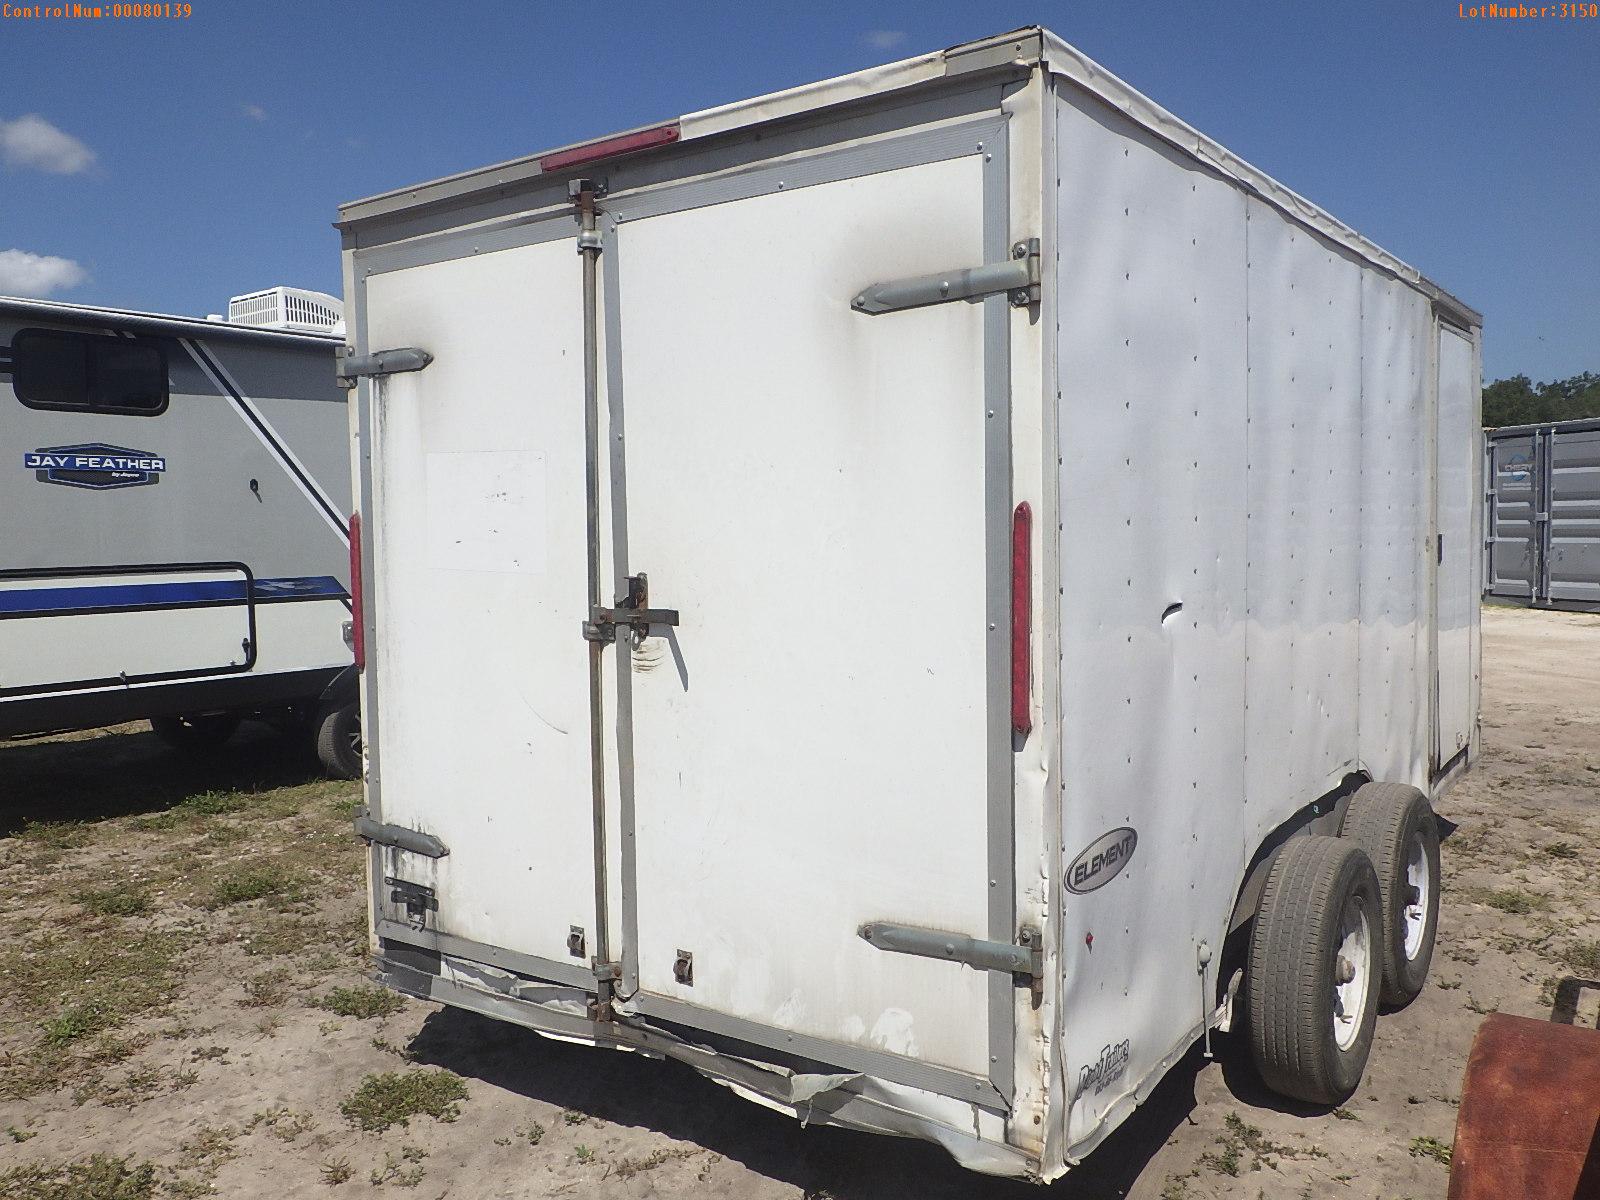 5-03150 (Trailers-Utility flatbed)  Seller:Private/Dealer 2018 LOOK PACE